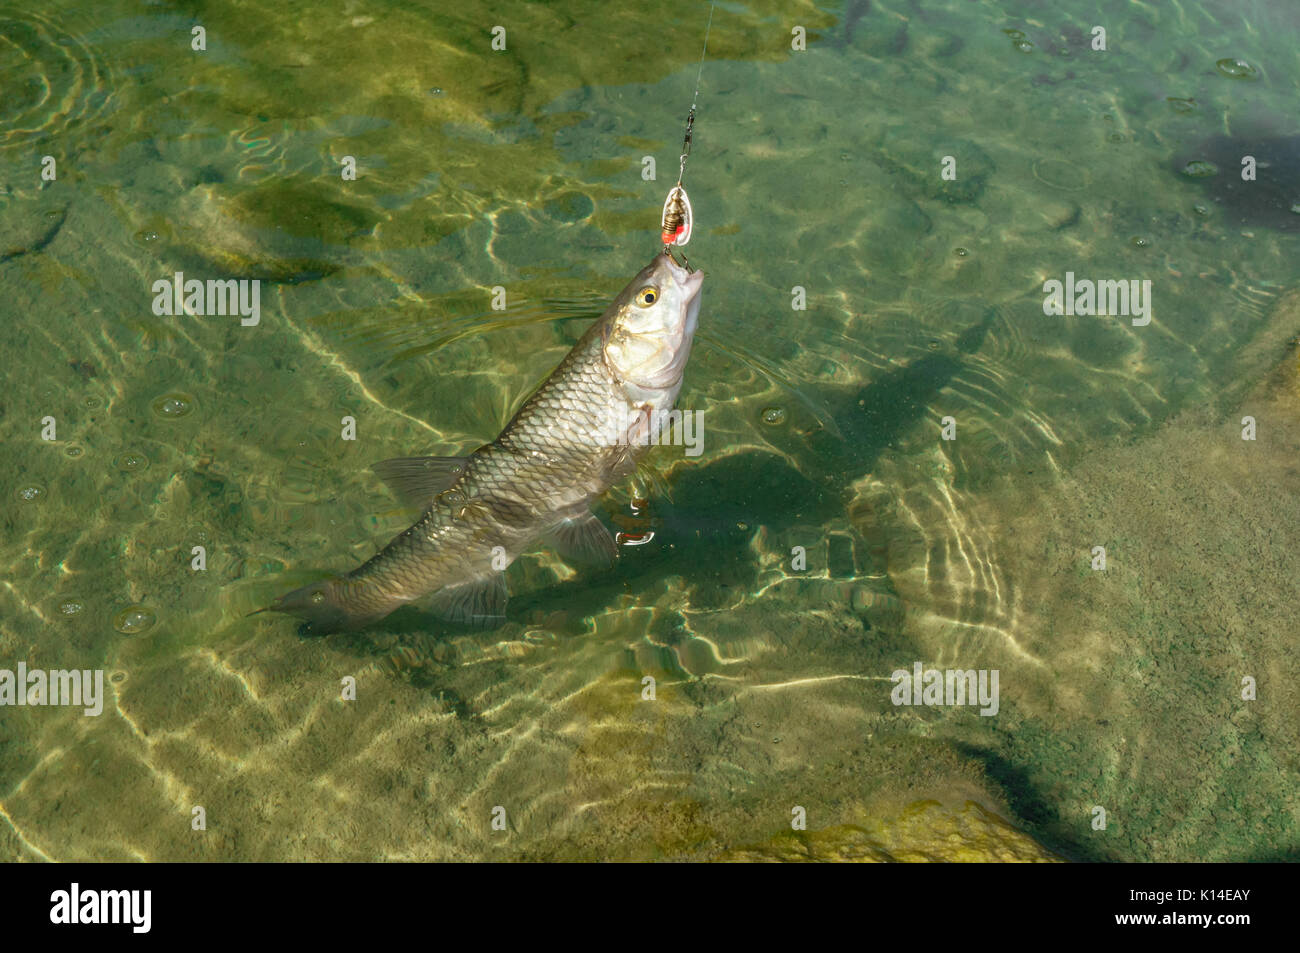 European Chub (Squalius cephalus) caught on a spinner with lure in its mouth while fishing in a river with shallow water Stock Photo